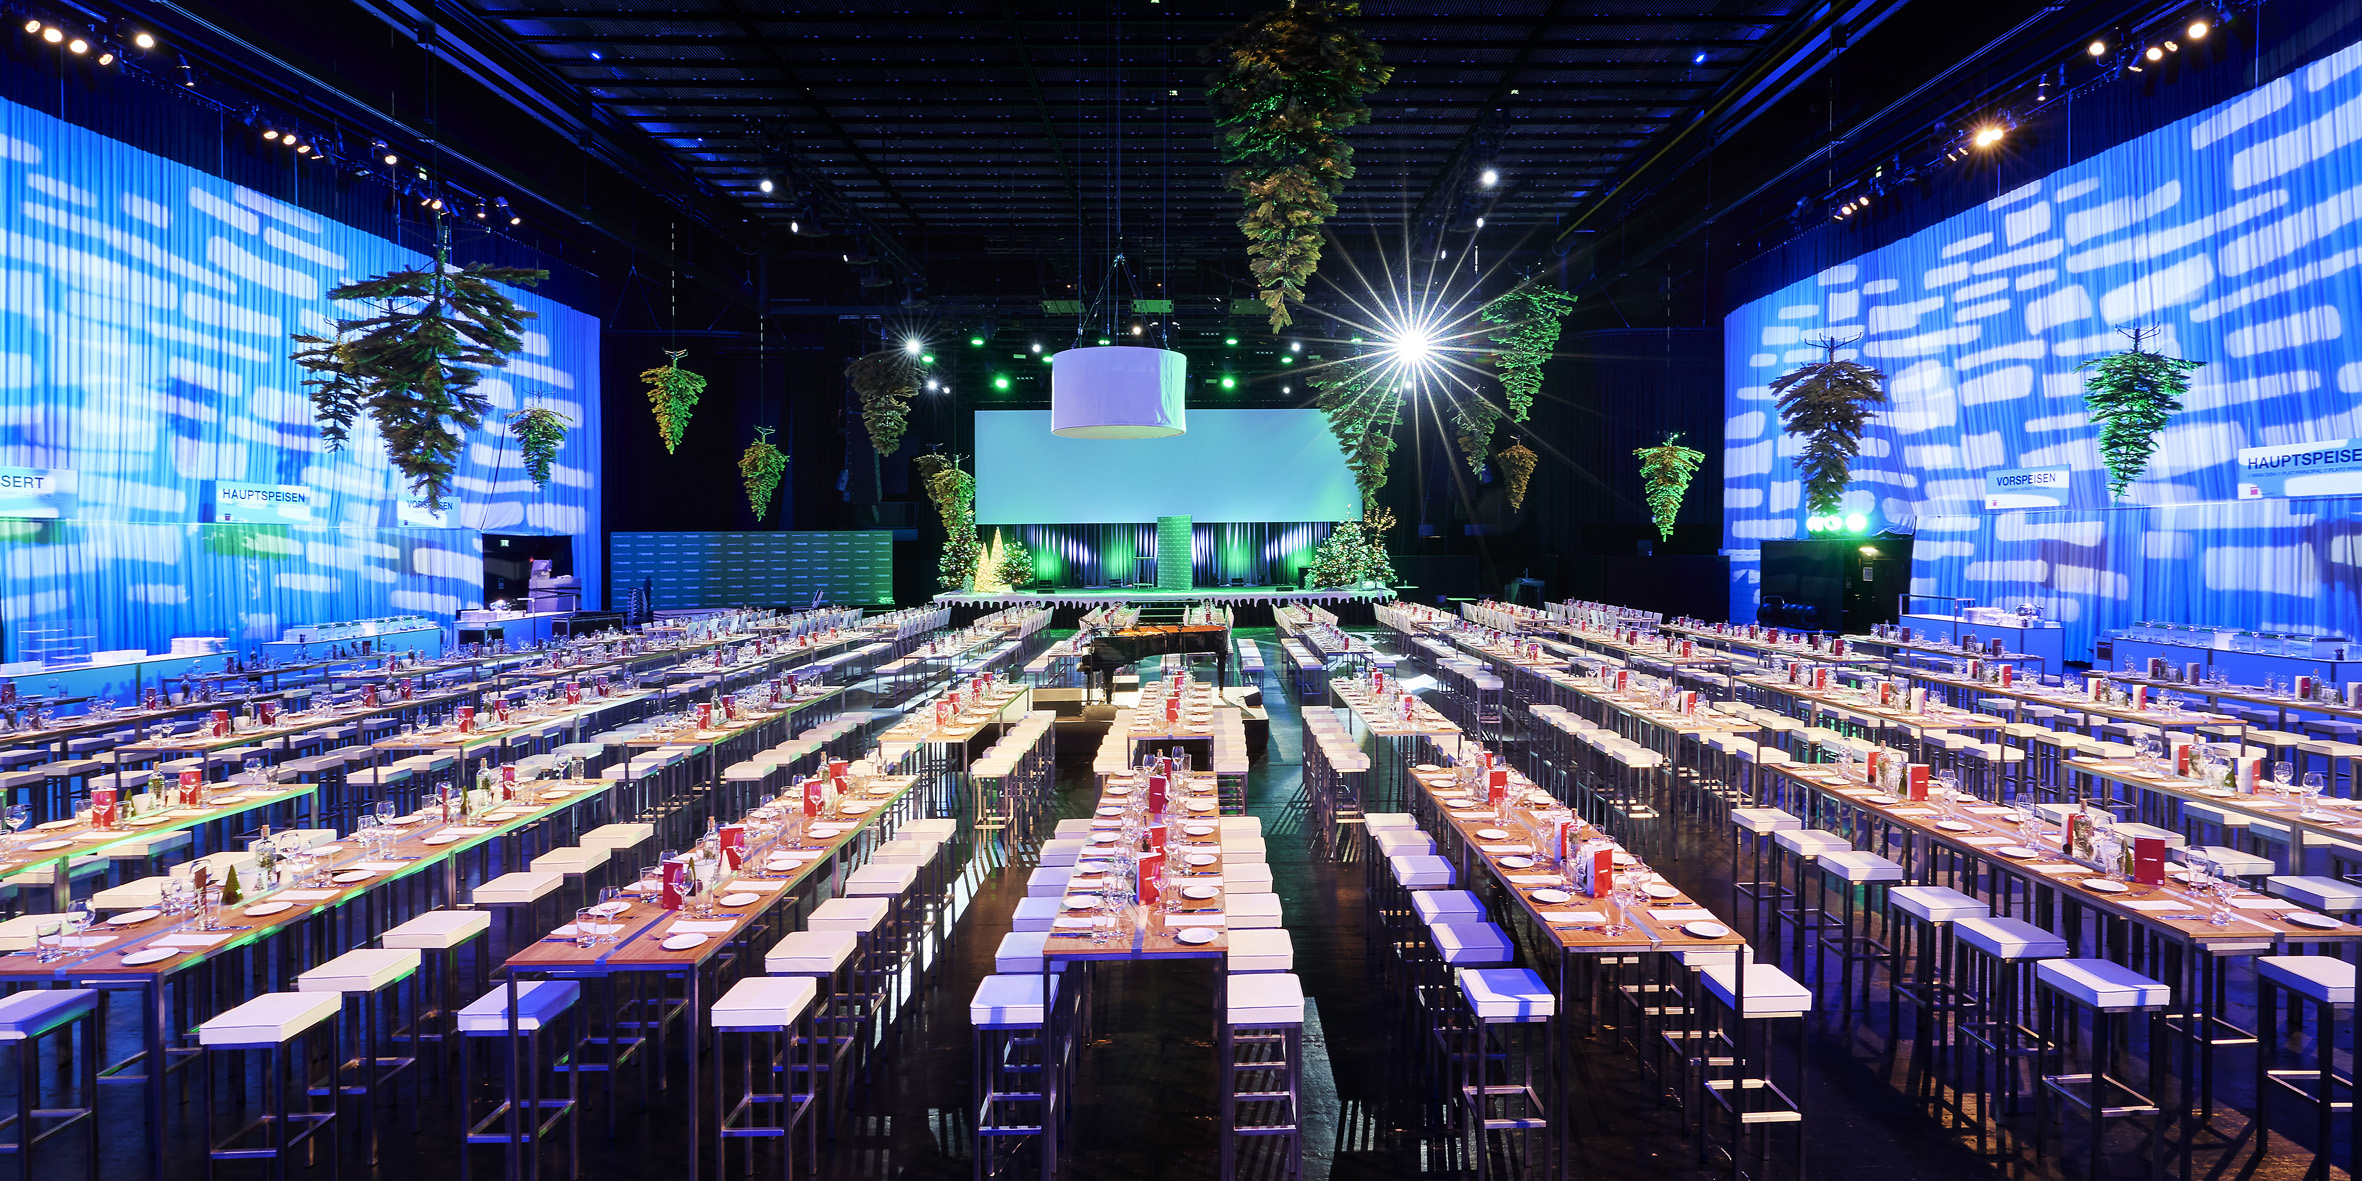 A versatile space for hosting events